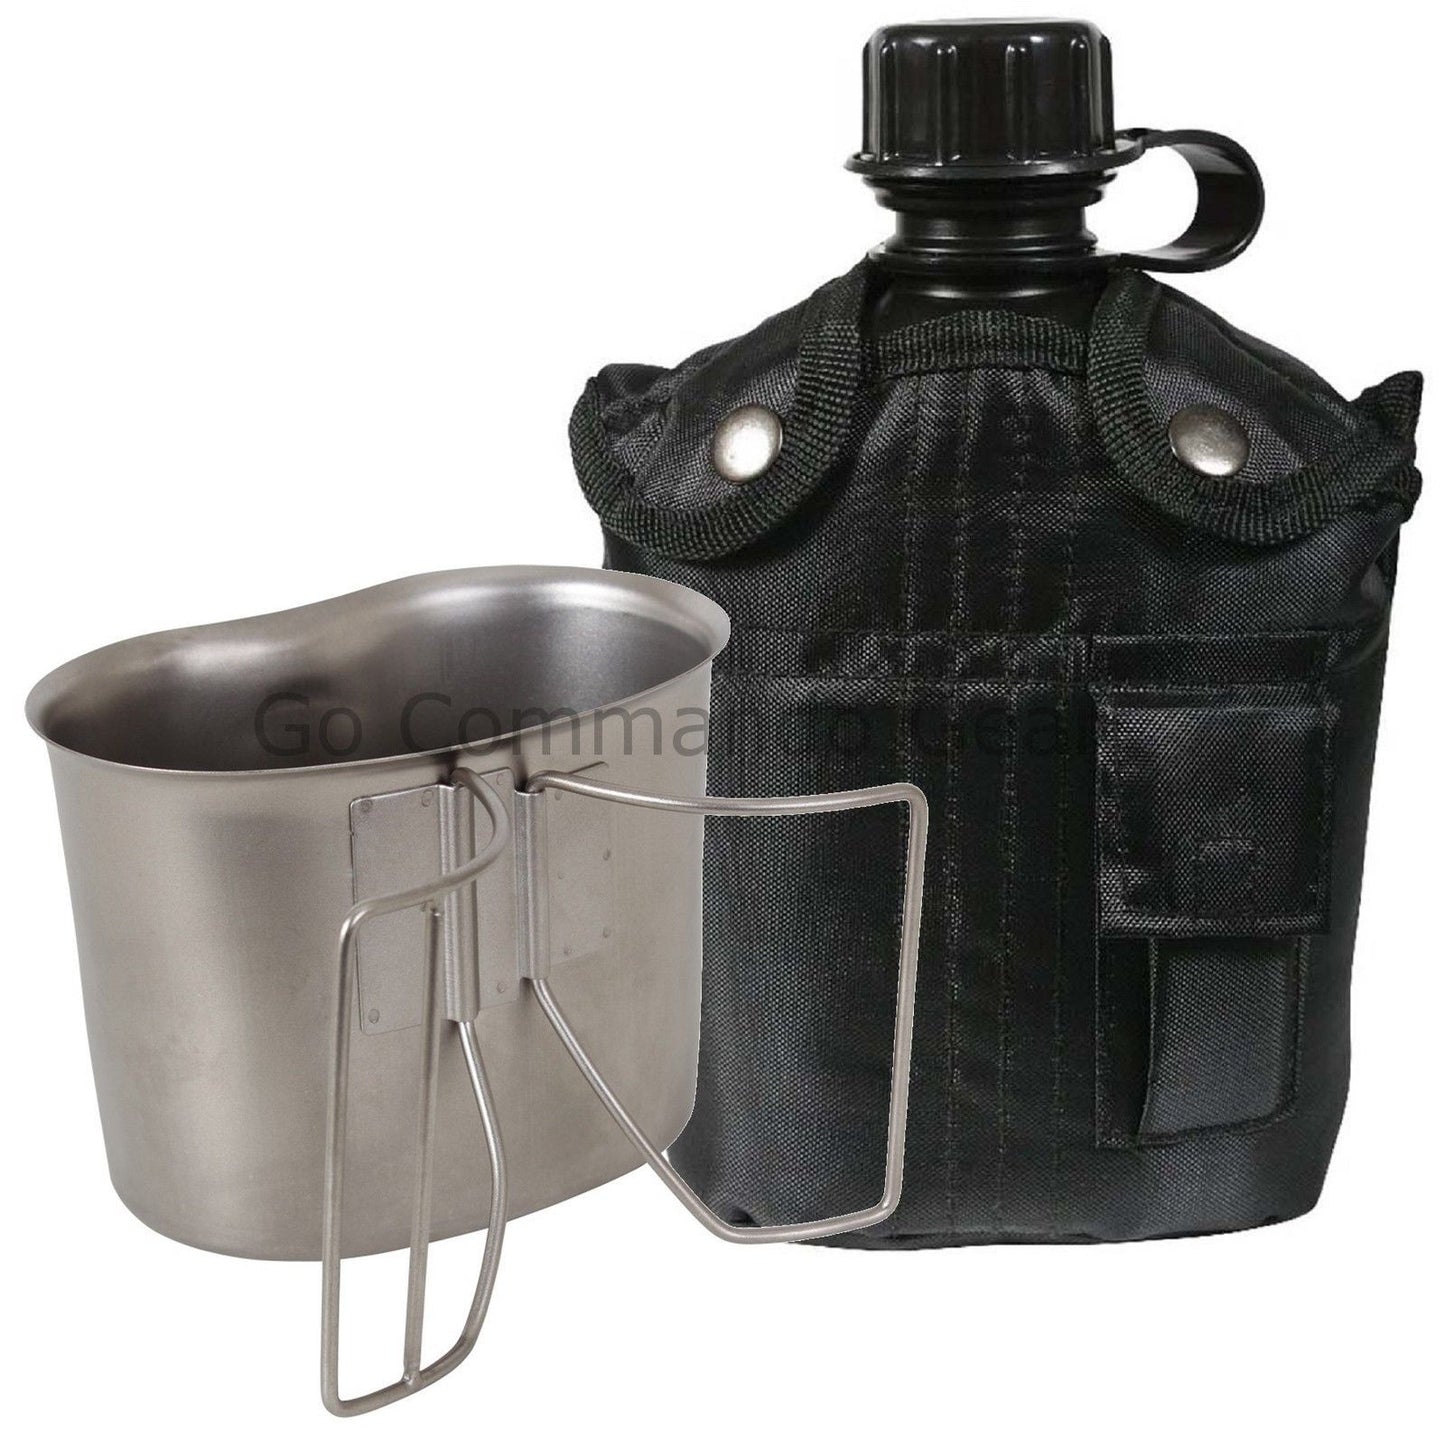 Rothco Black 3 Piece Canteen Kit With Cover & Aluminum Cup - Camping Survival